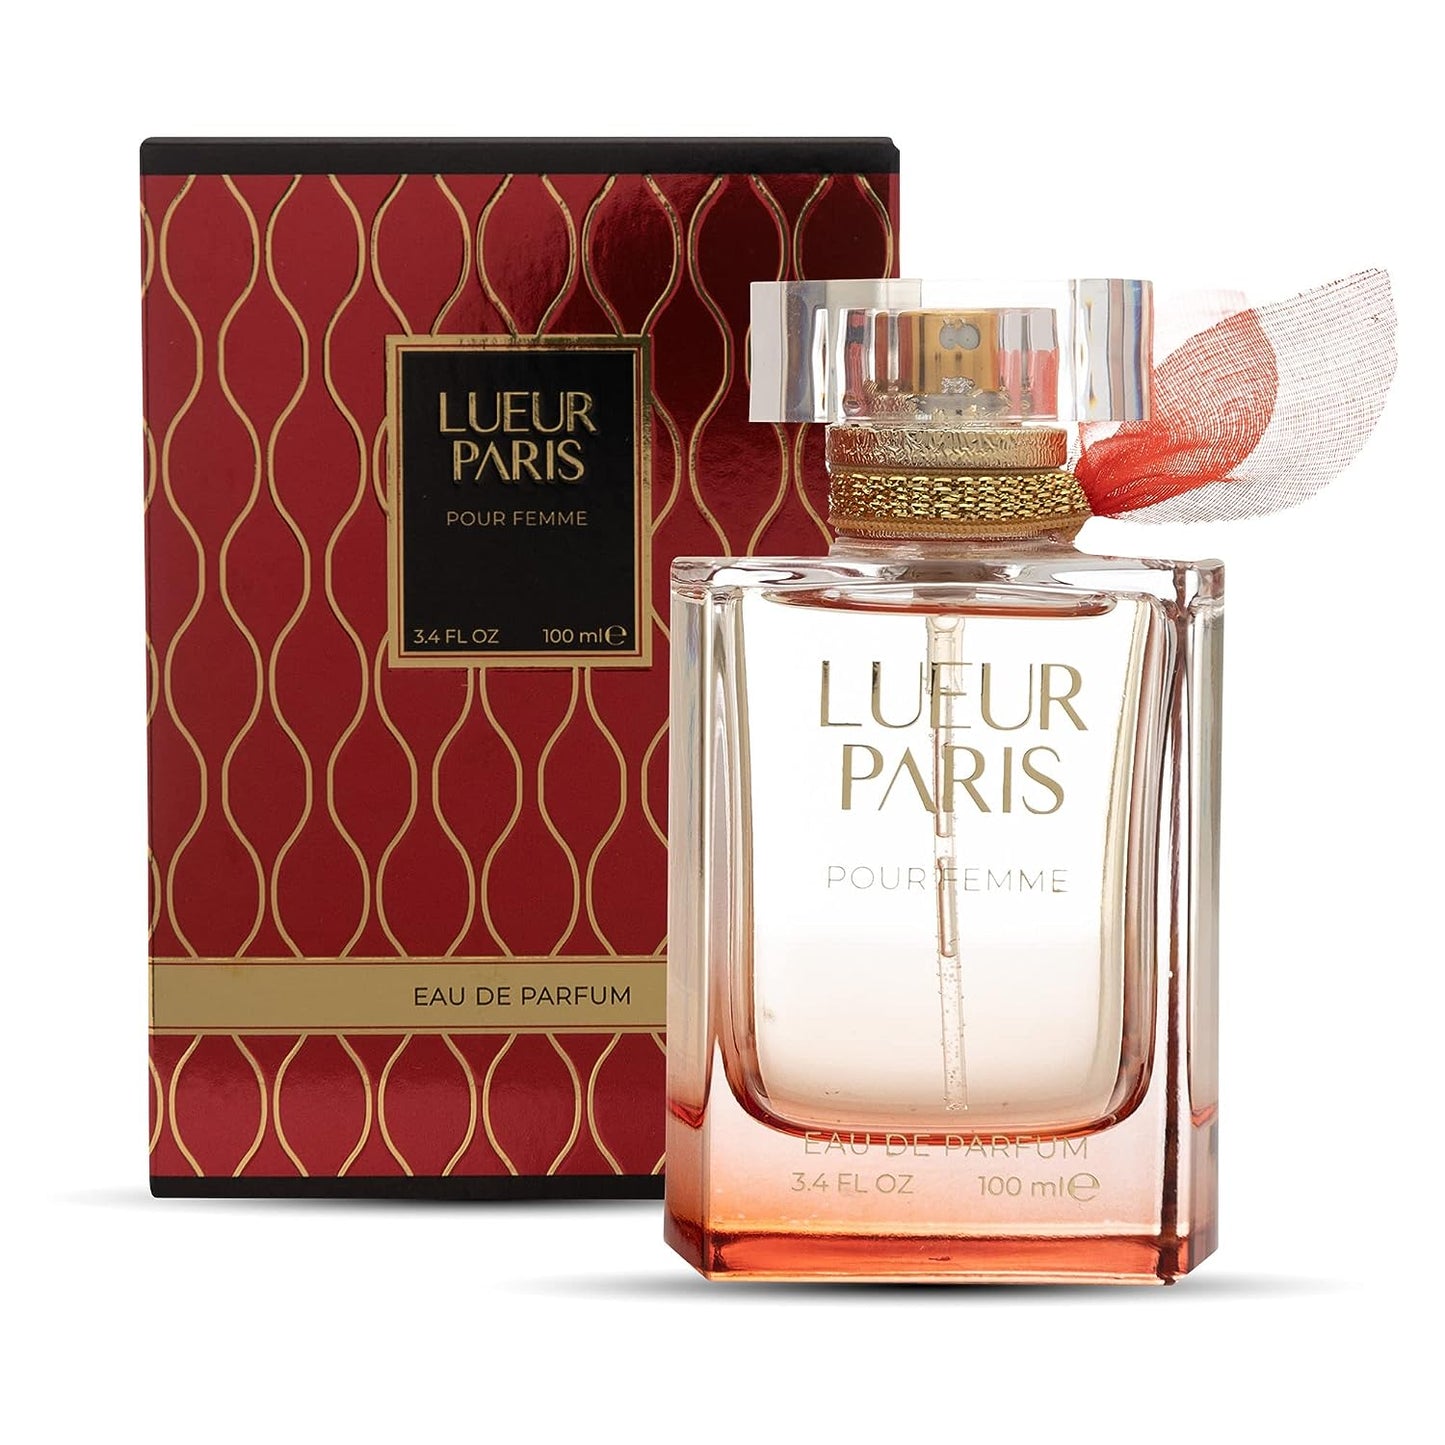 Regal Fragrances Lueur Paris Womens Perfume - Inspired by the Scent of the YSL'S Mon Paris Perfume for Women - Floral Fruity snd Sweet Chypre Scent, 3.4 Fl Oz (100 ML)